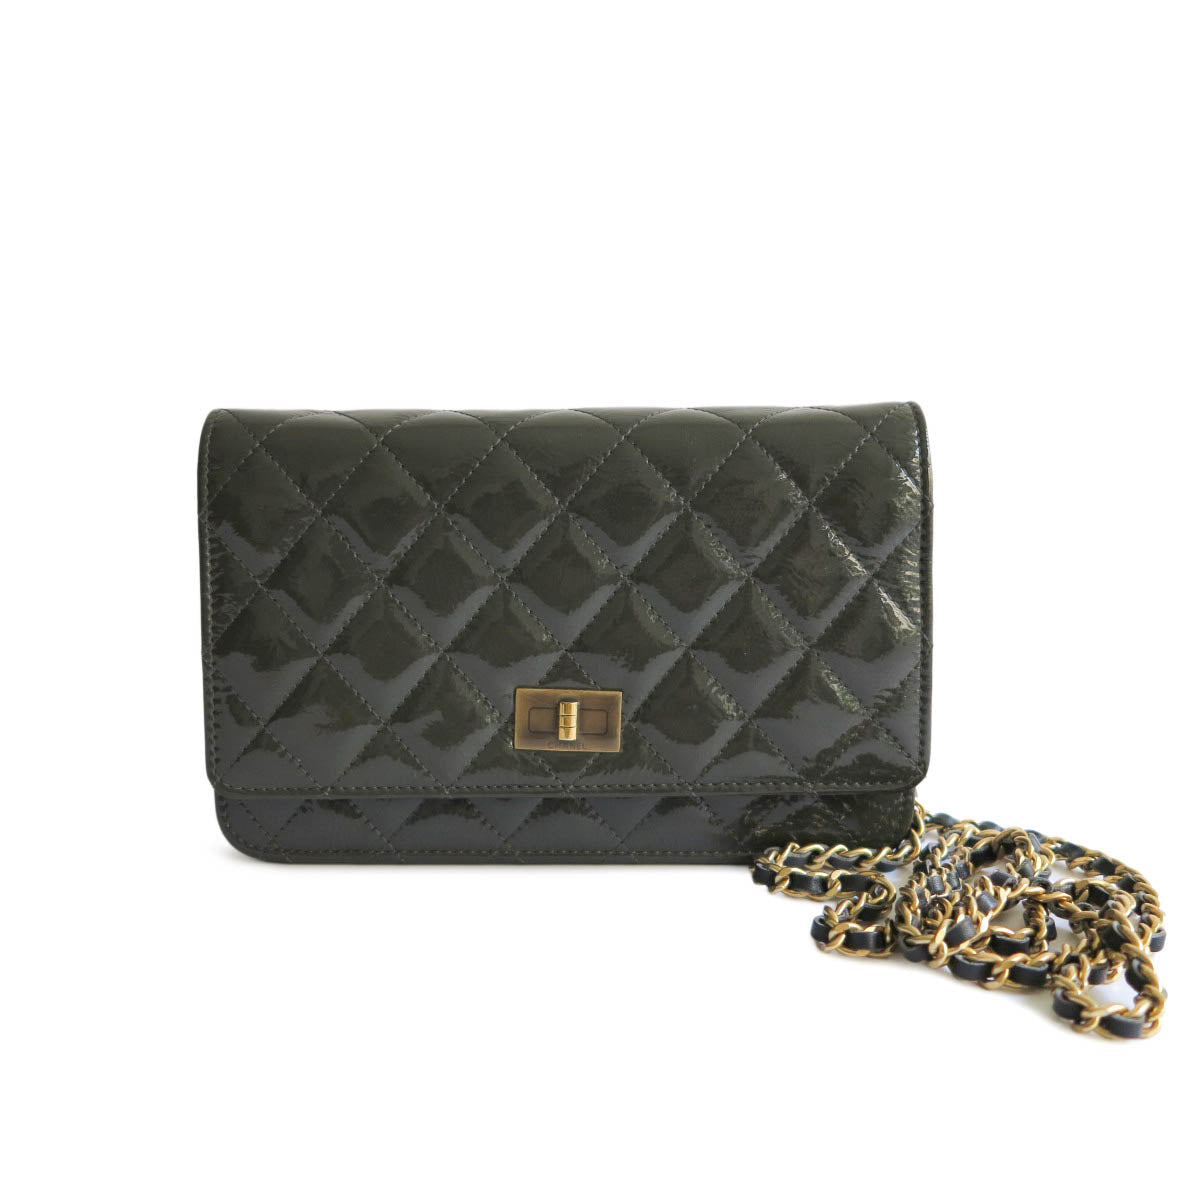 CHANEL 2.55 Wallet On Chain WOC in Dark Olive Grey Patent Leather – Dearluxe